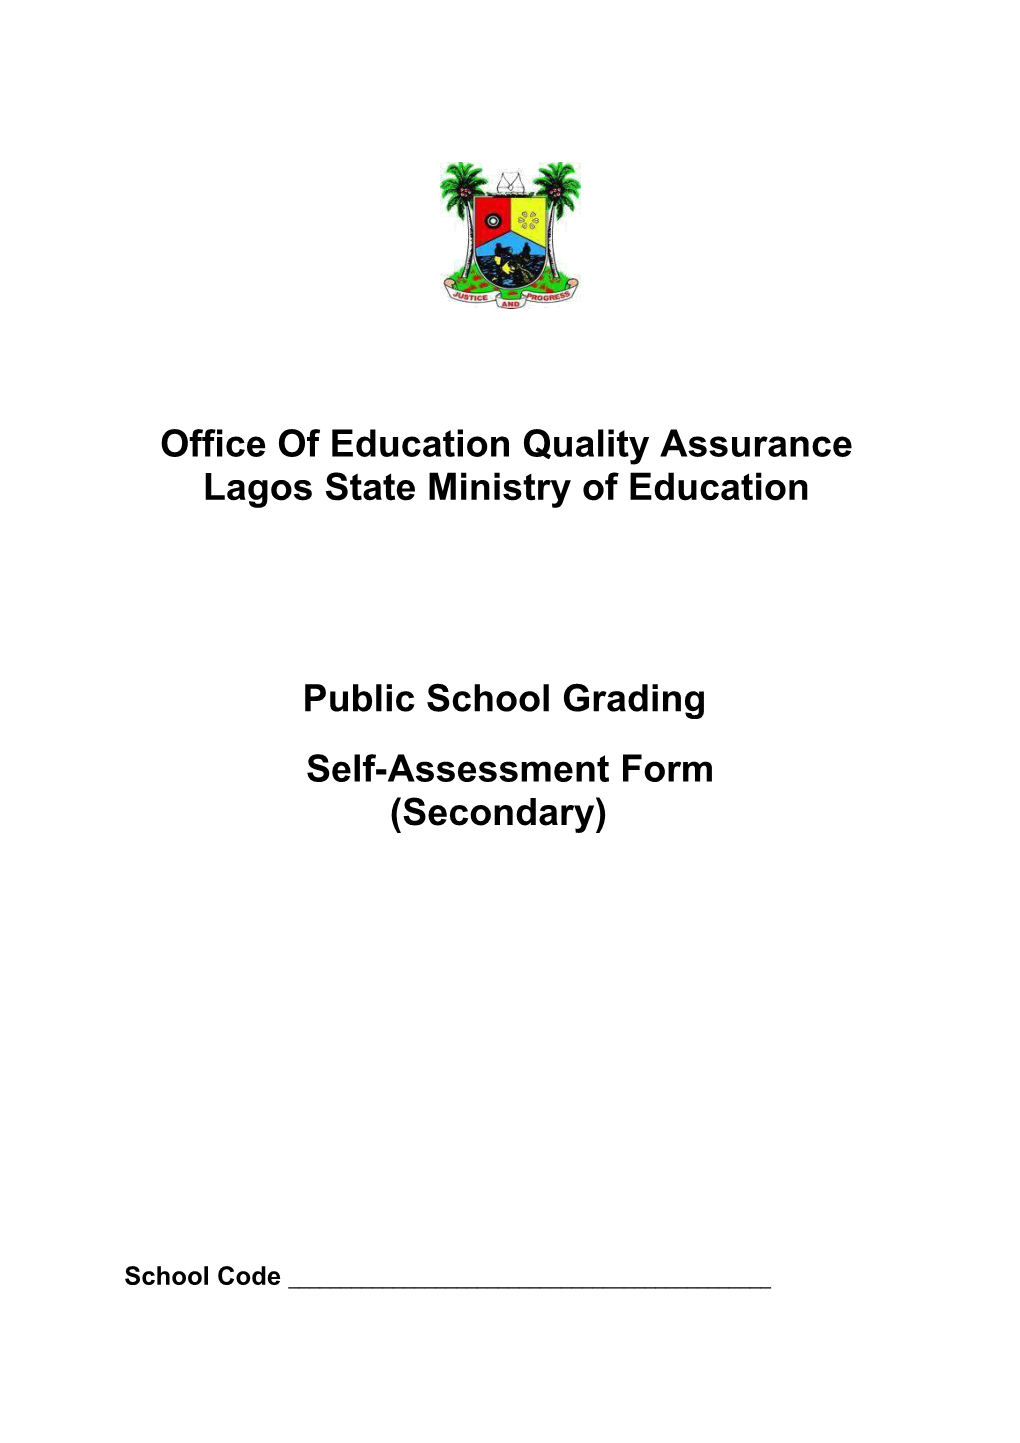 Office of Education Quality Assurance